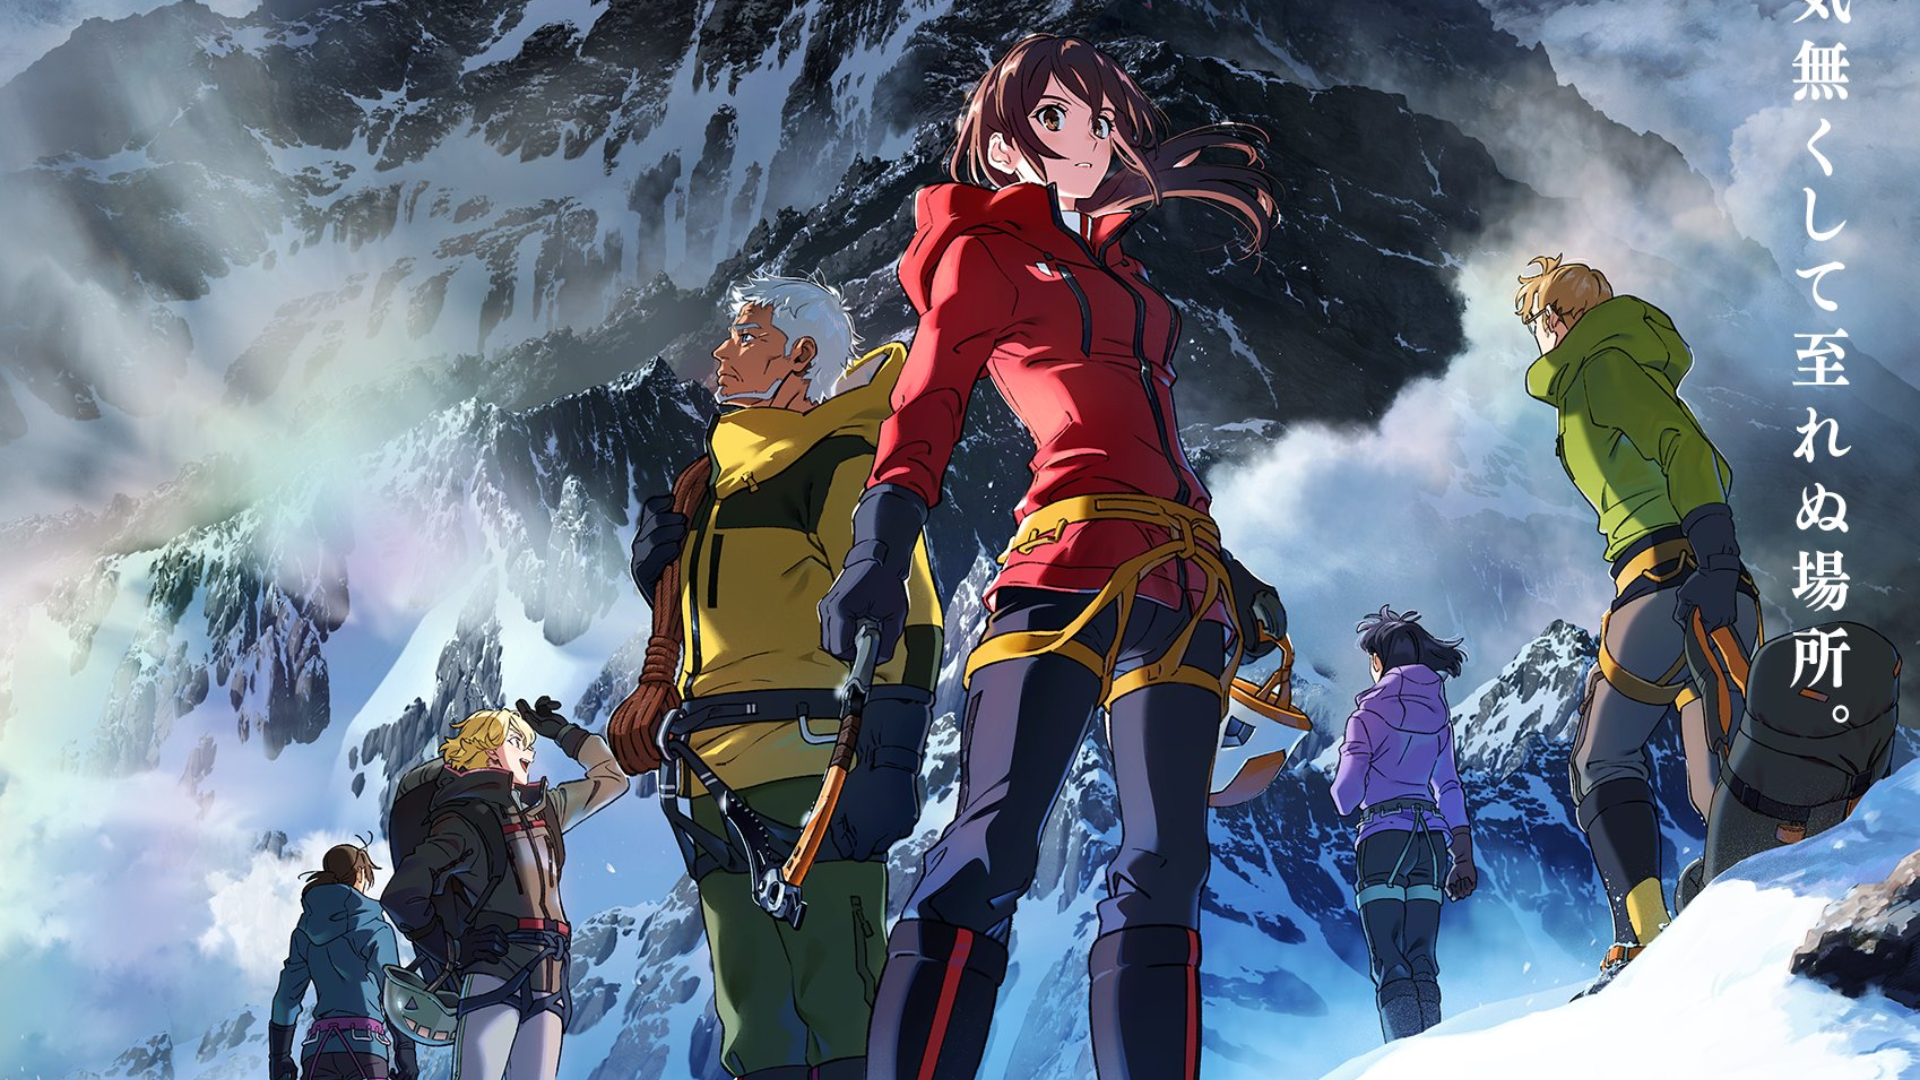 Naked Peak - Climb the Mountains of Madness Anime Film Gets February 28  Release - Anime Corner